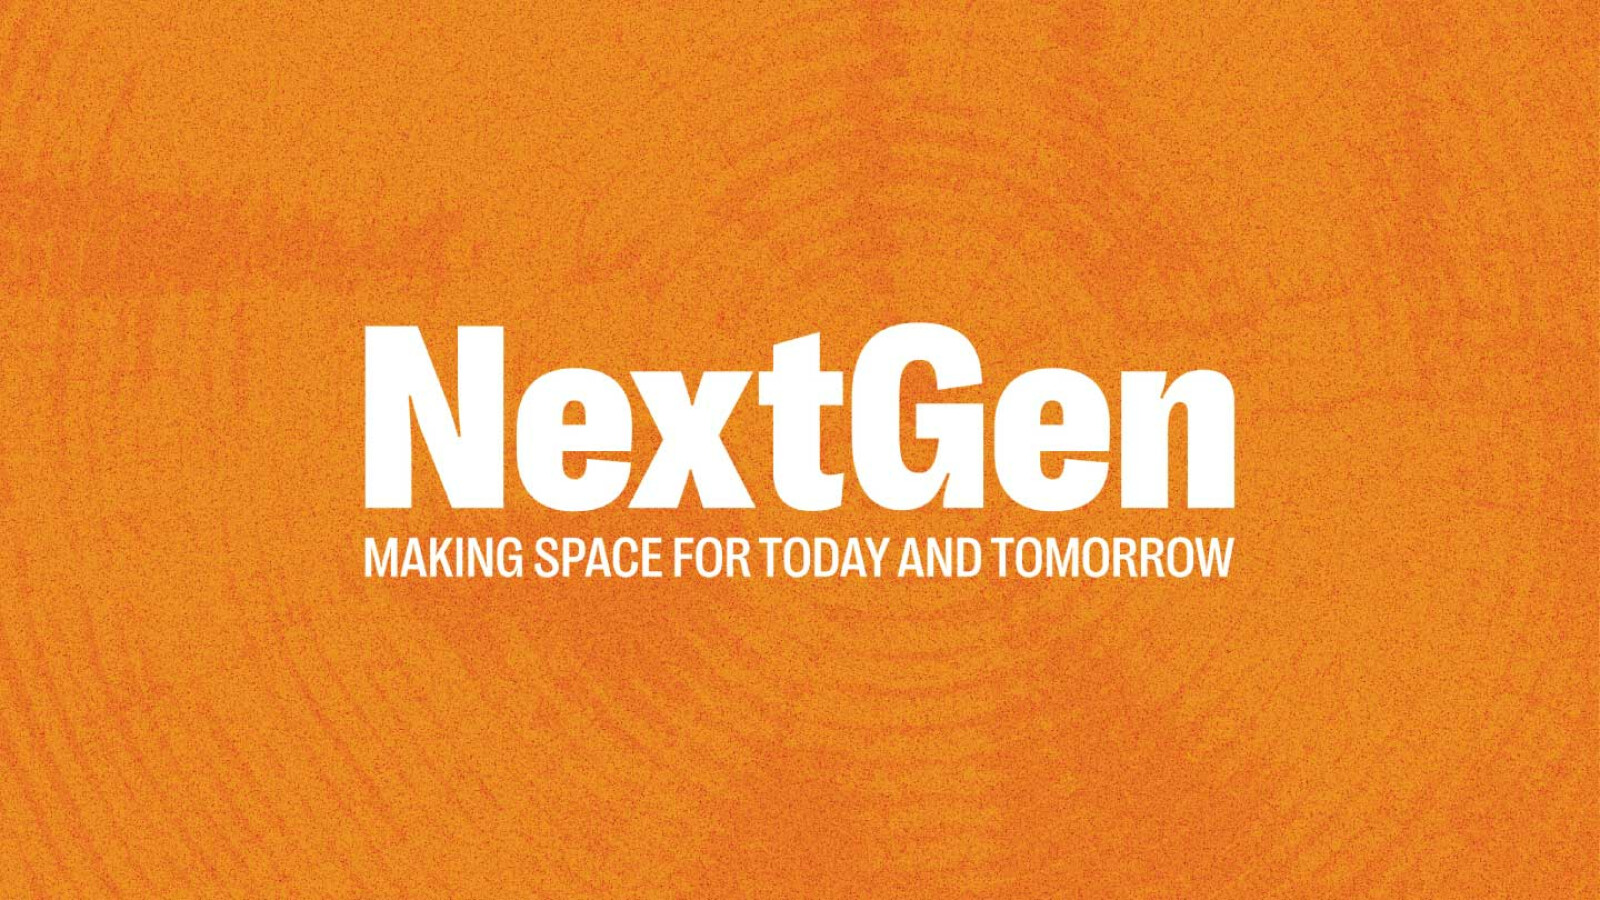 NextGen: Making Space for Today and Tomorrow